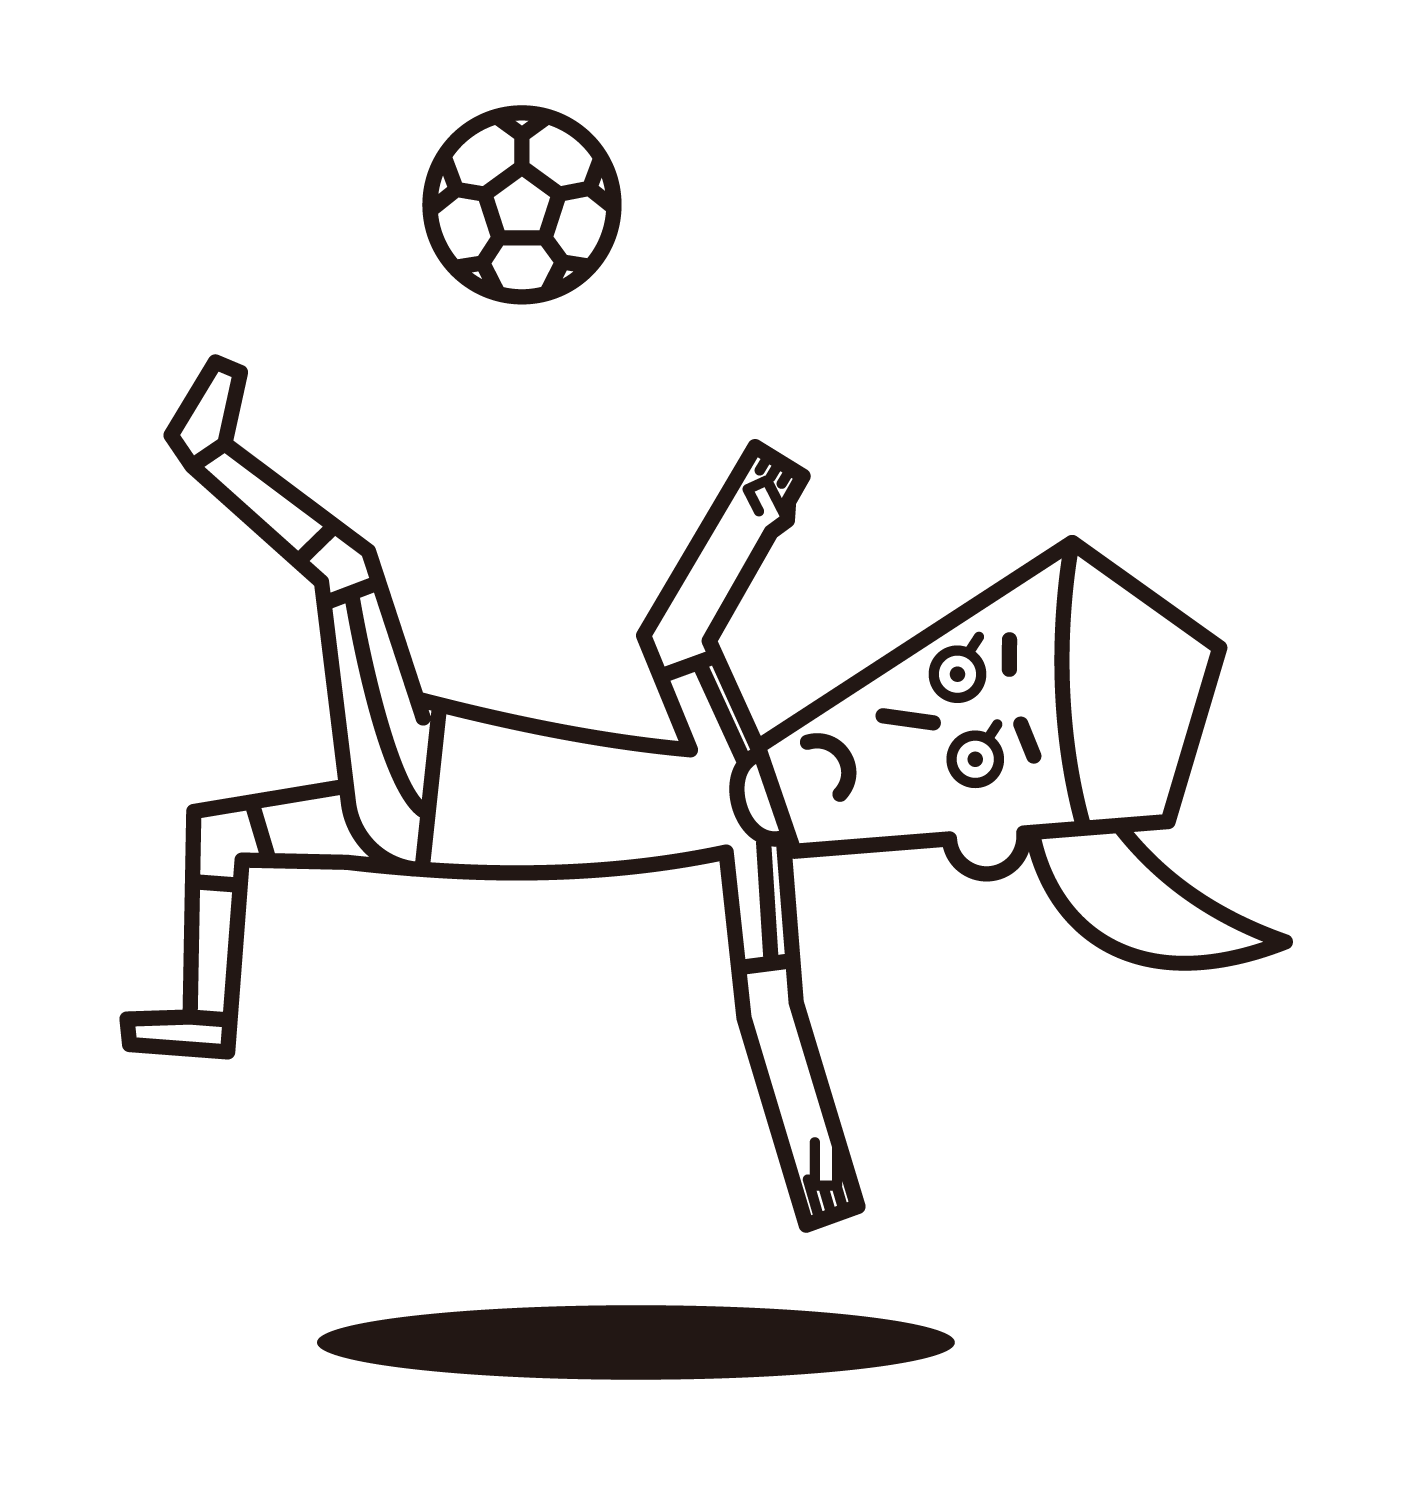 Illustration of a female soccer player doing an overhead kick